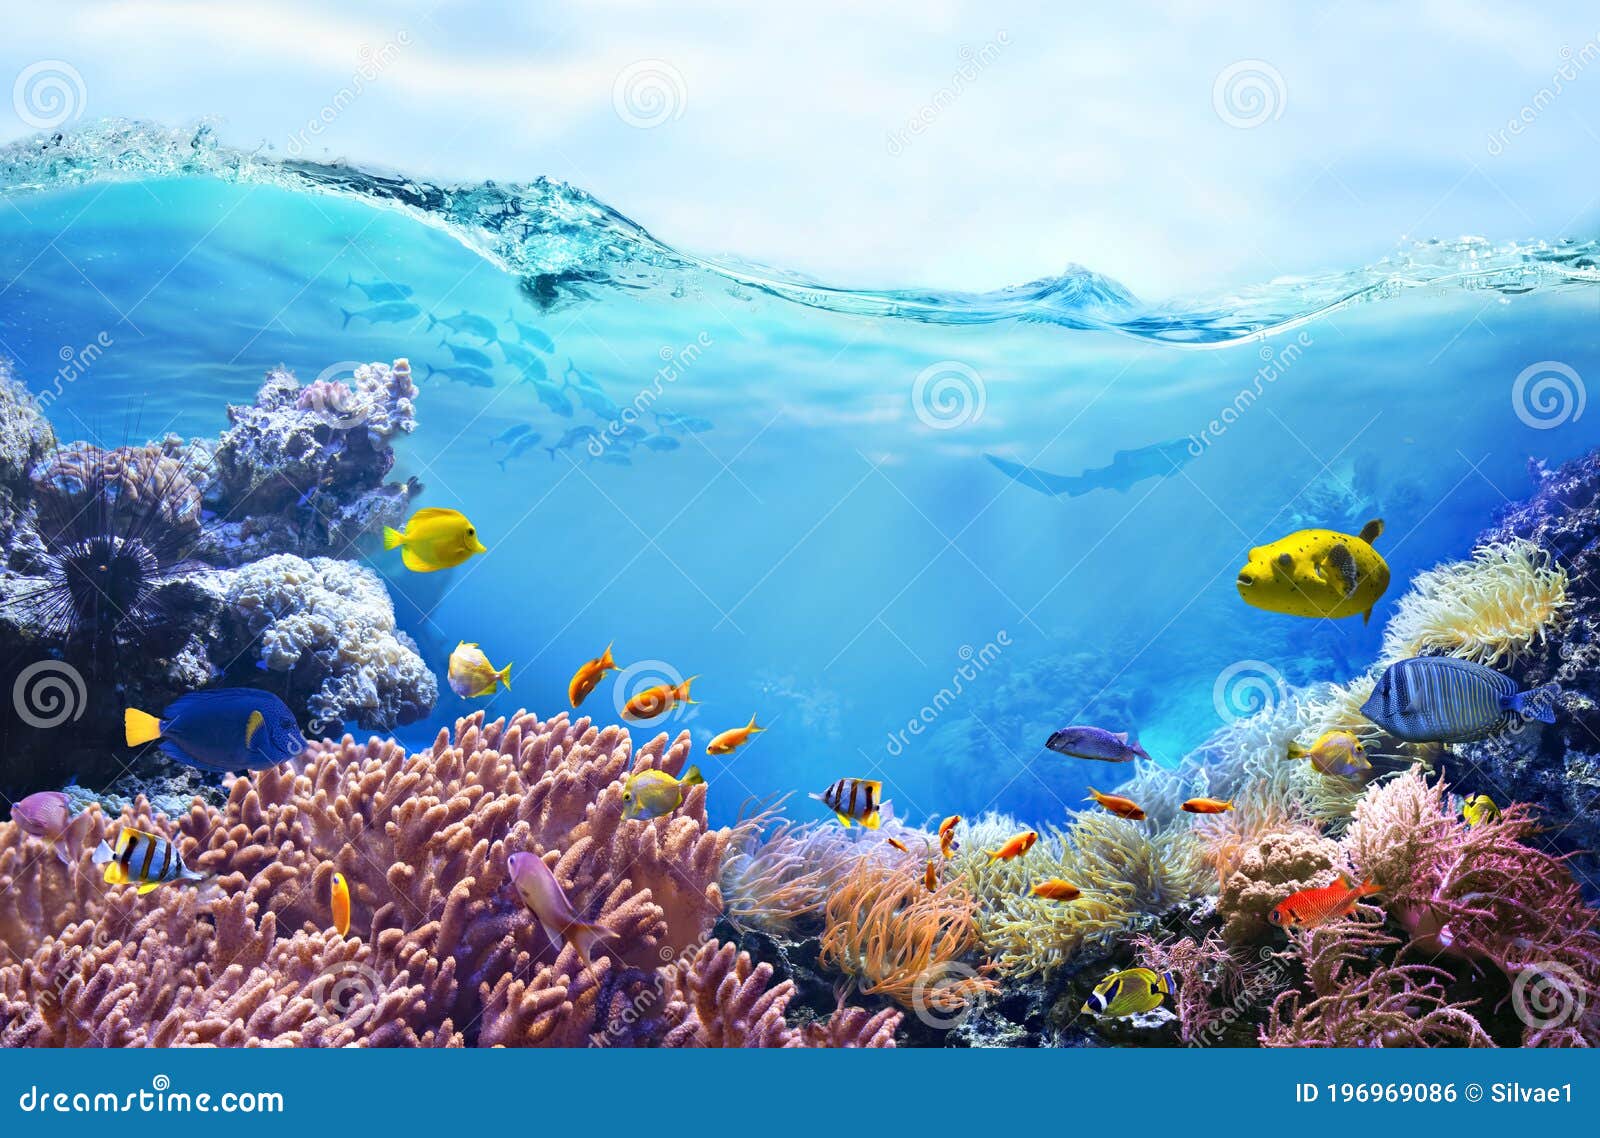 Underwater View of the Coral Reef. Stock Photo - Image of fish, fishing:  196969086